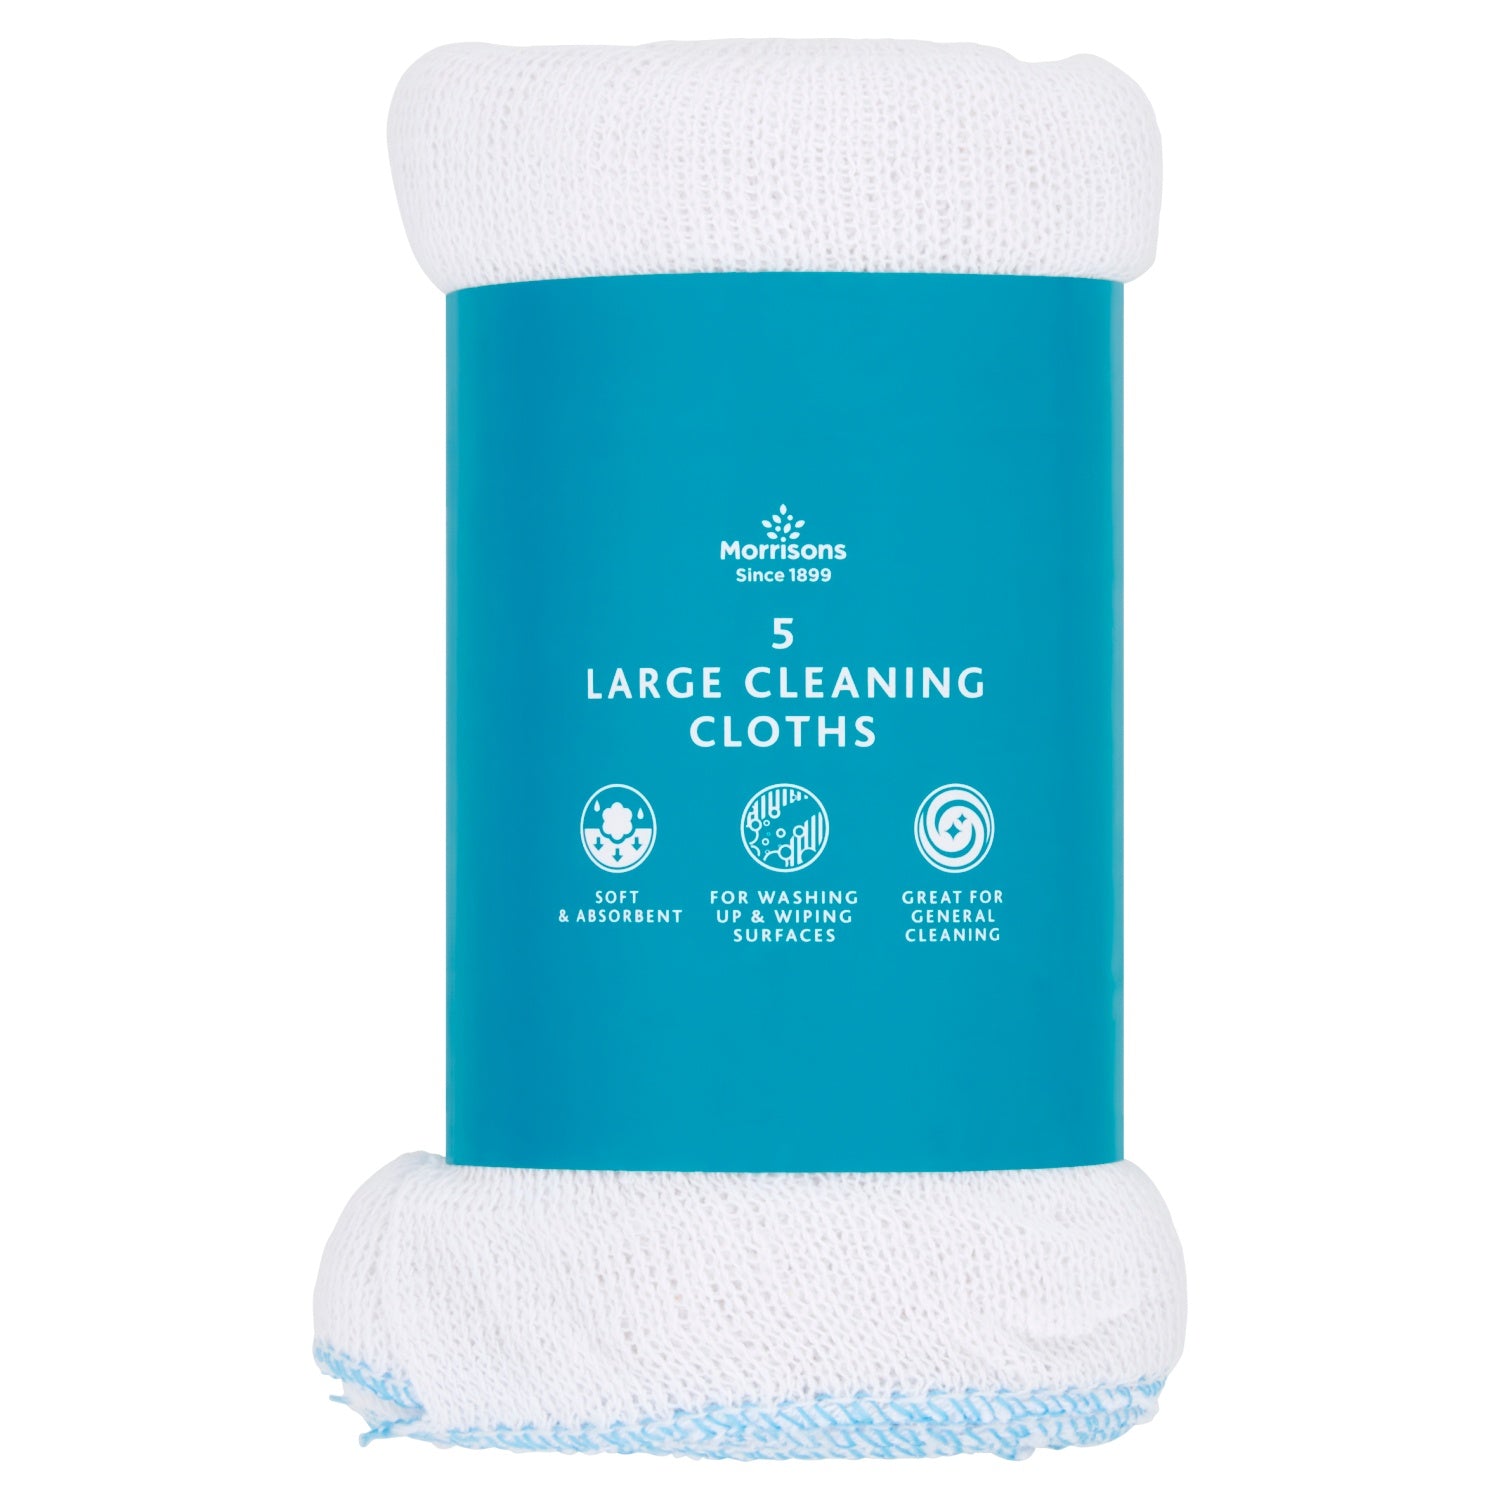 Morrisons Large Cleaning Cloths 5pk